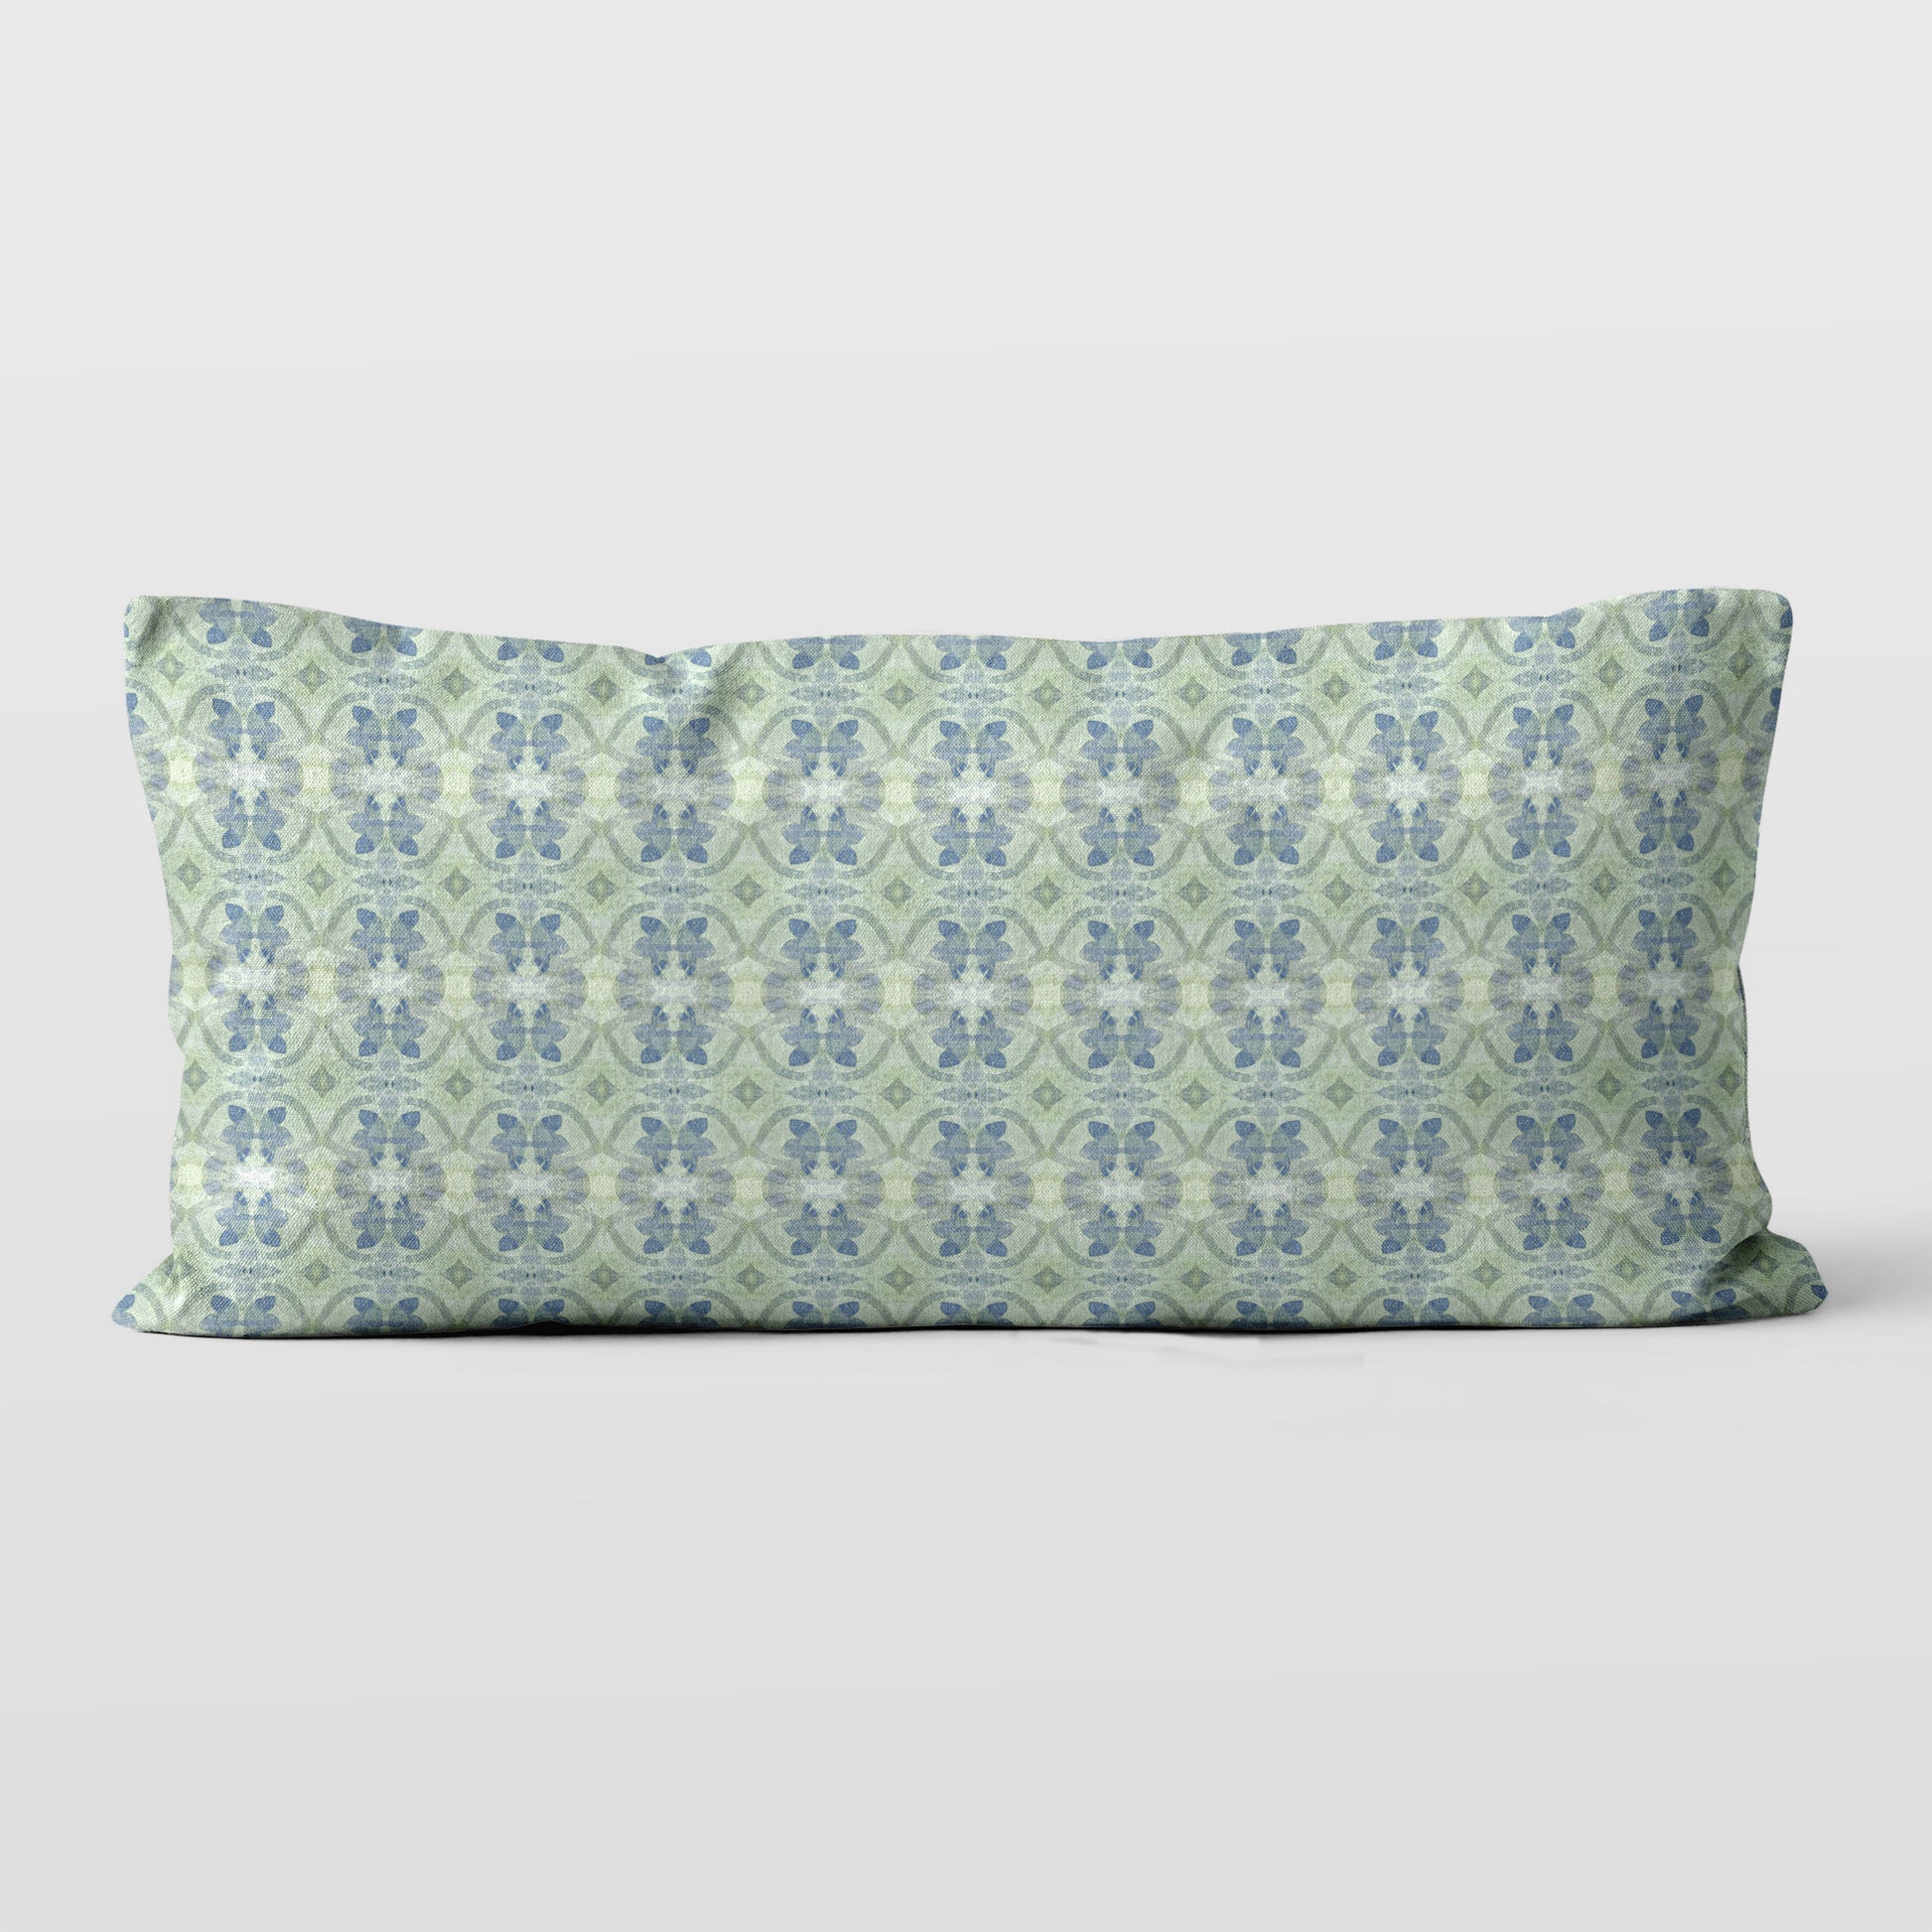 12x24 lumbar pillow featuring a hand-painted green and blue abstract pattern